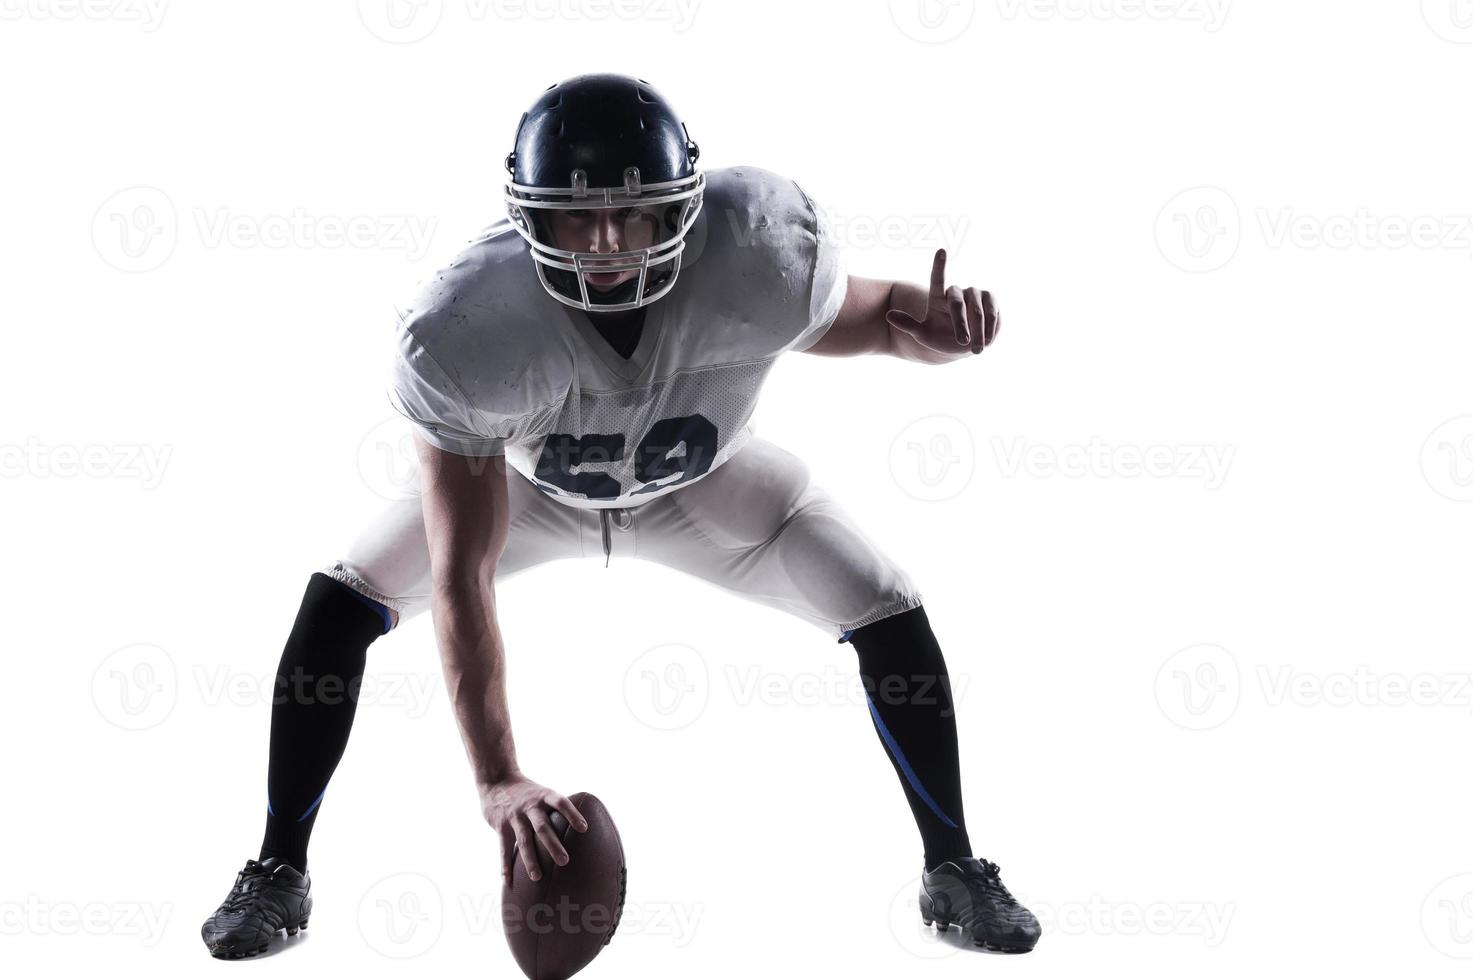 Full readiness.  American football player getting ready before throwing ball while standing against white background photo